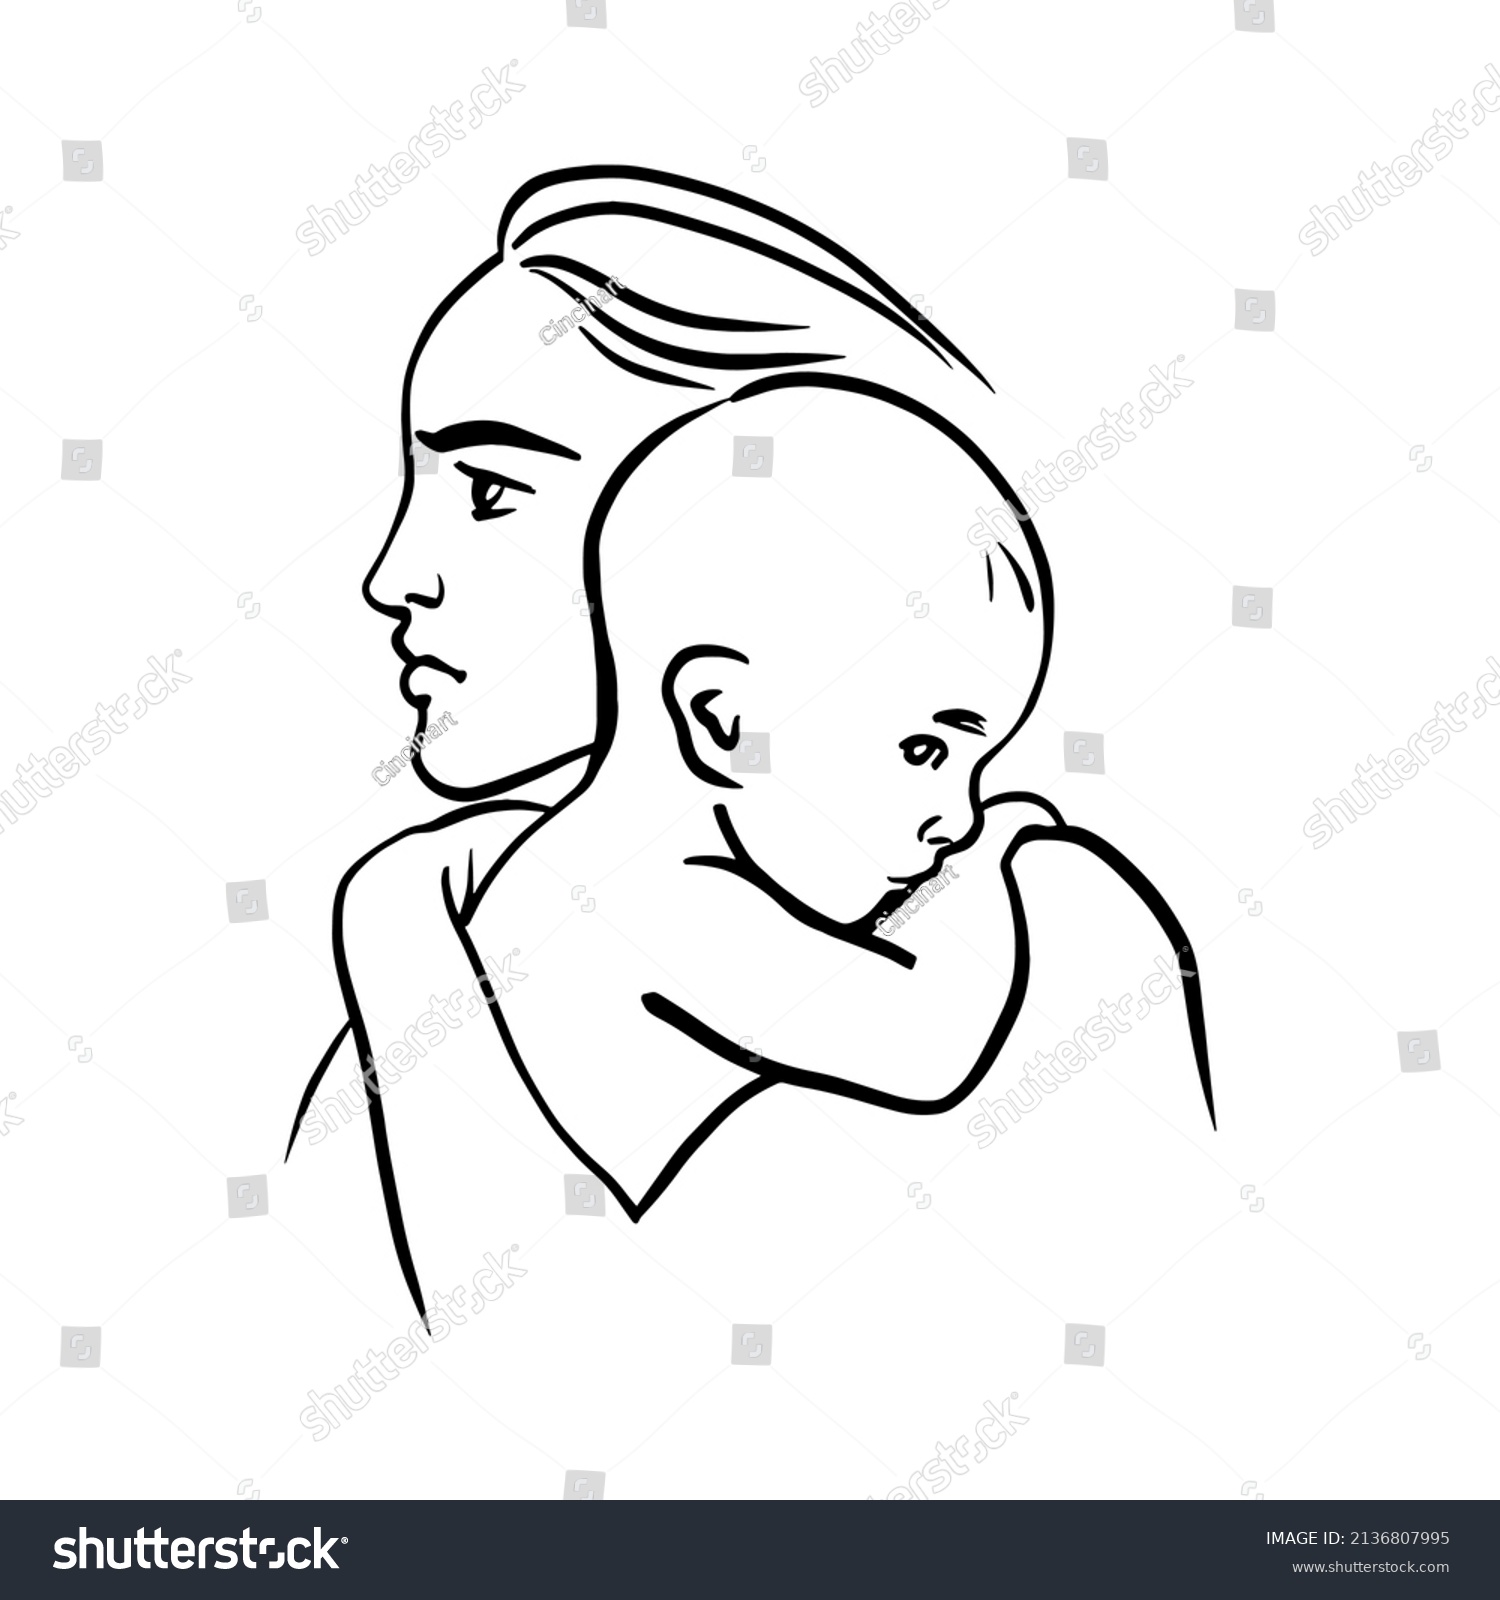 1,762 Baby crying sketch Images, Stock Photos & Vectors | Shutterstock